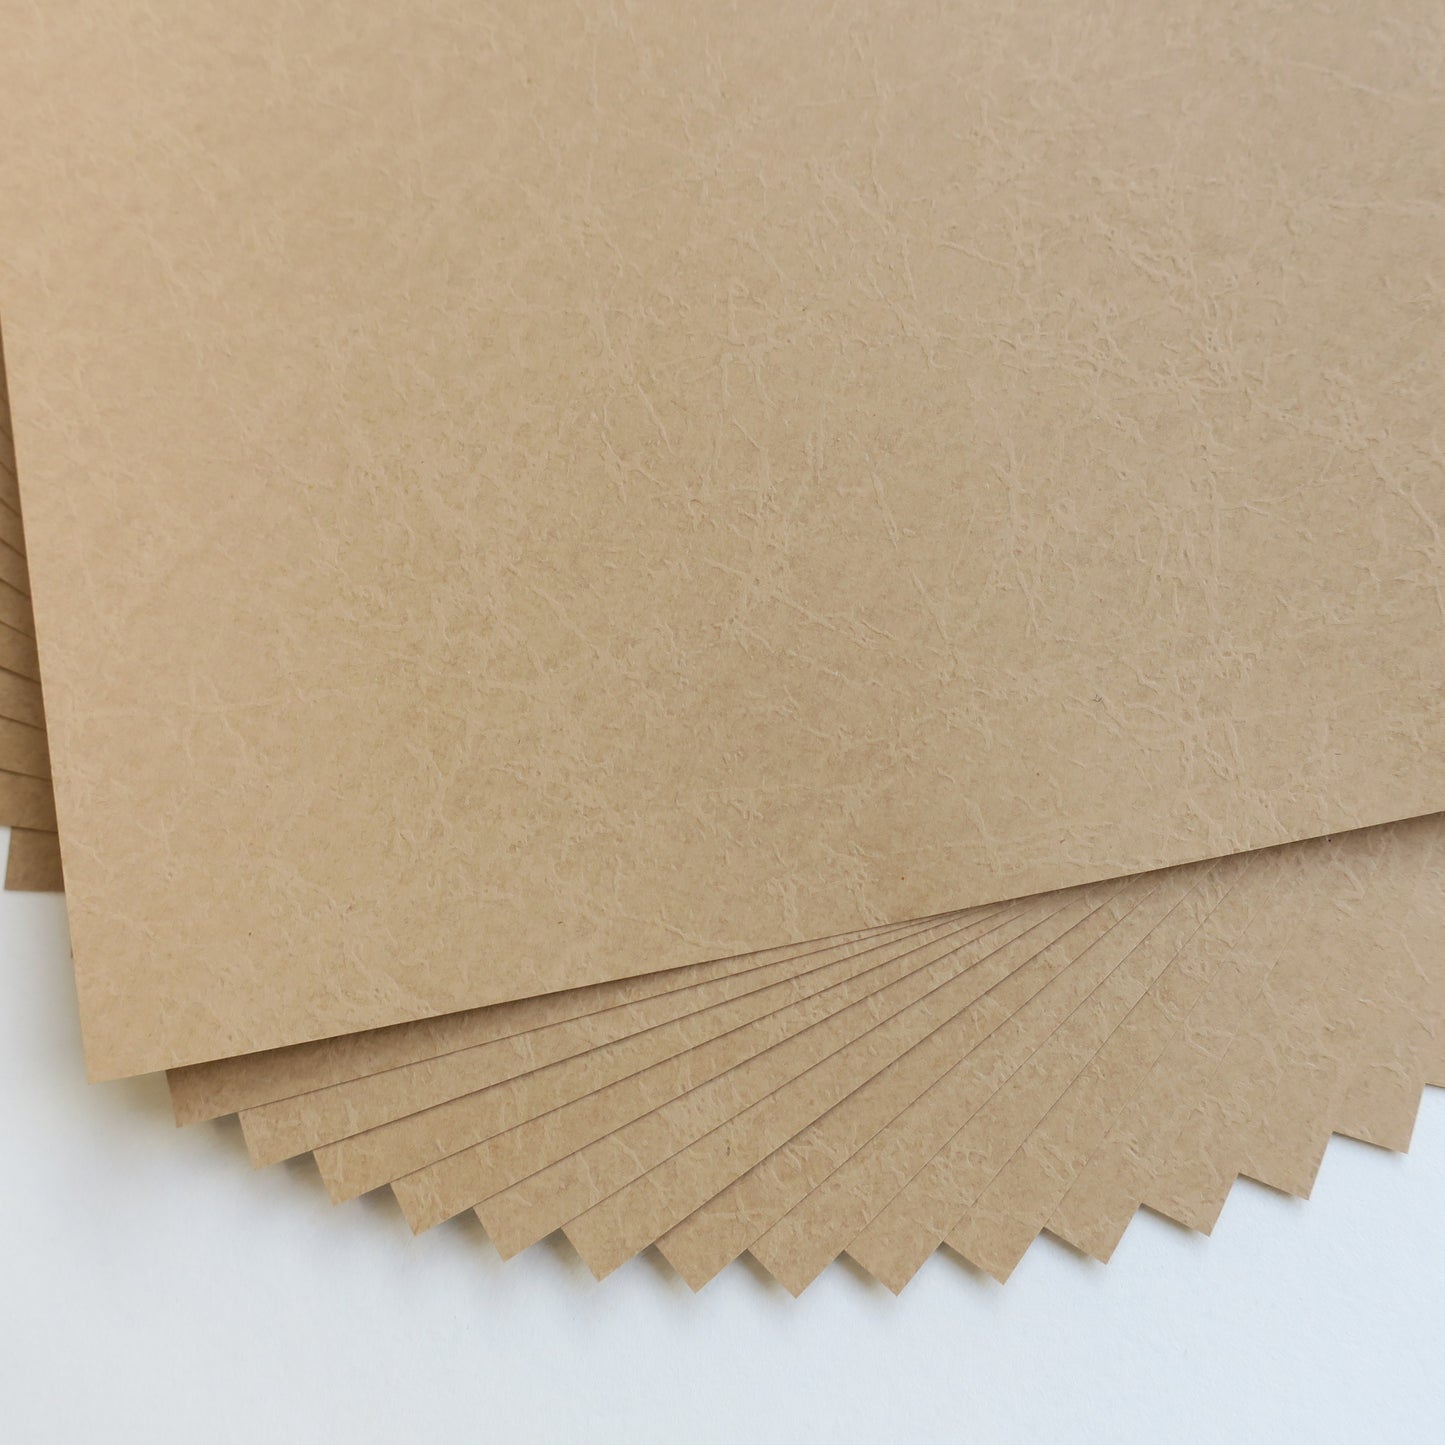 Leathac Rouketsu Paper Pack - Brown